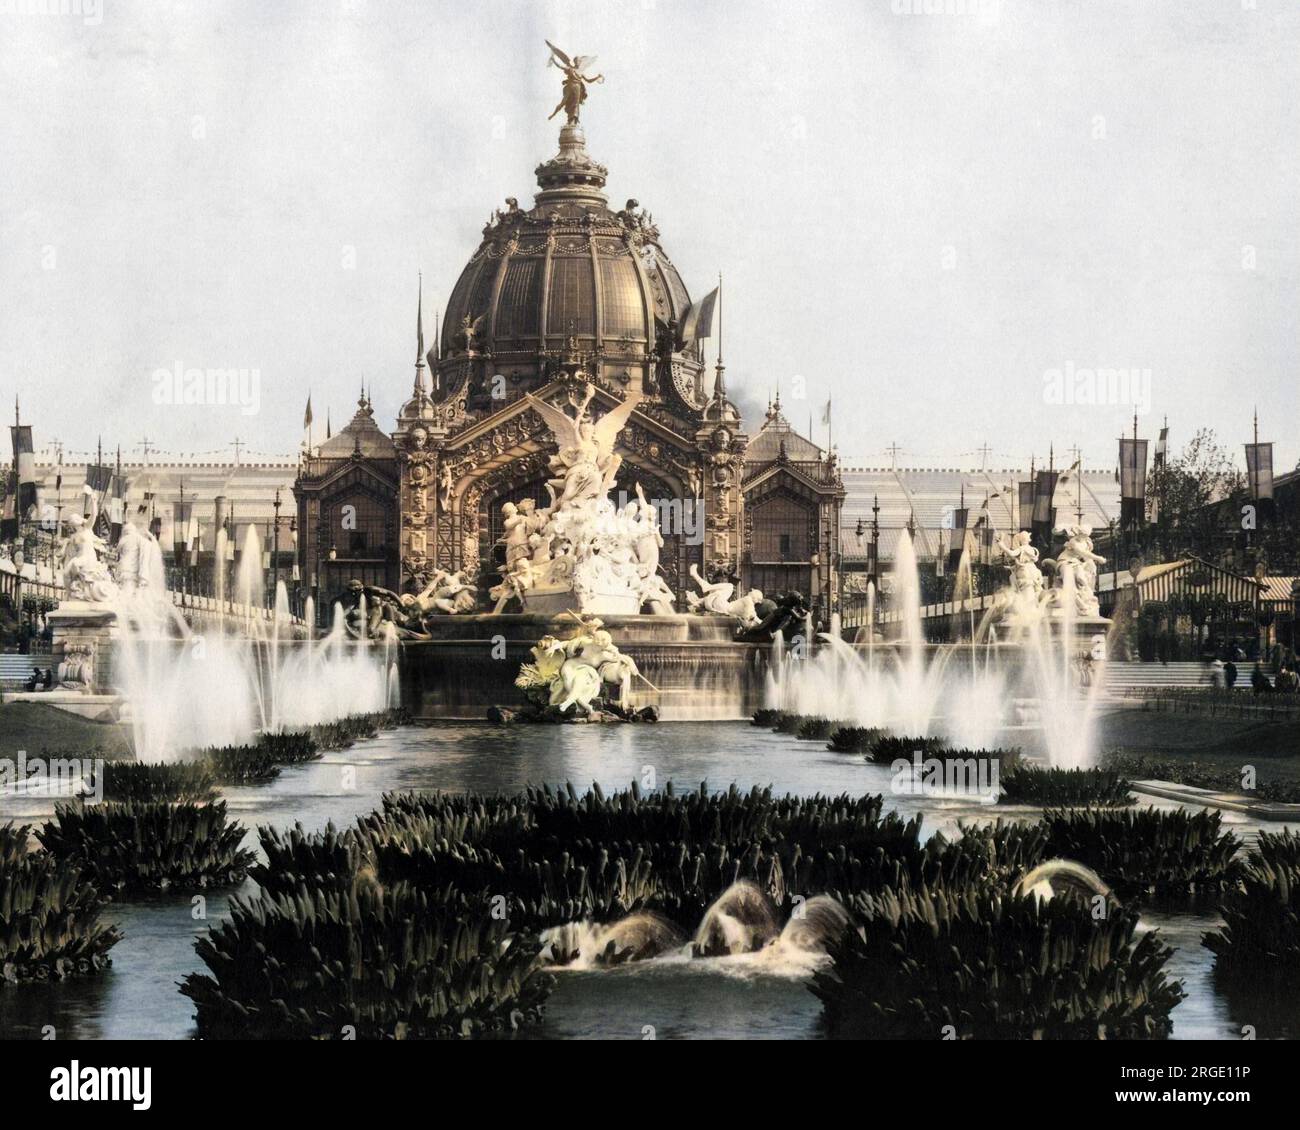 Scene during the Universal Exhibition (Exposition Universelle), Paris, France, with a large fountain and a domed building. Stock Photo